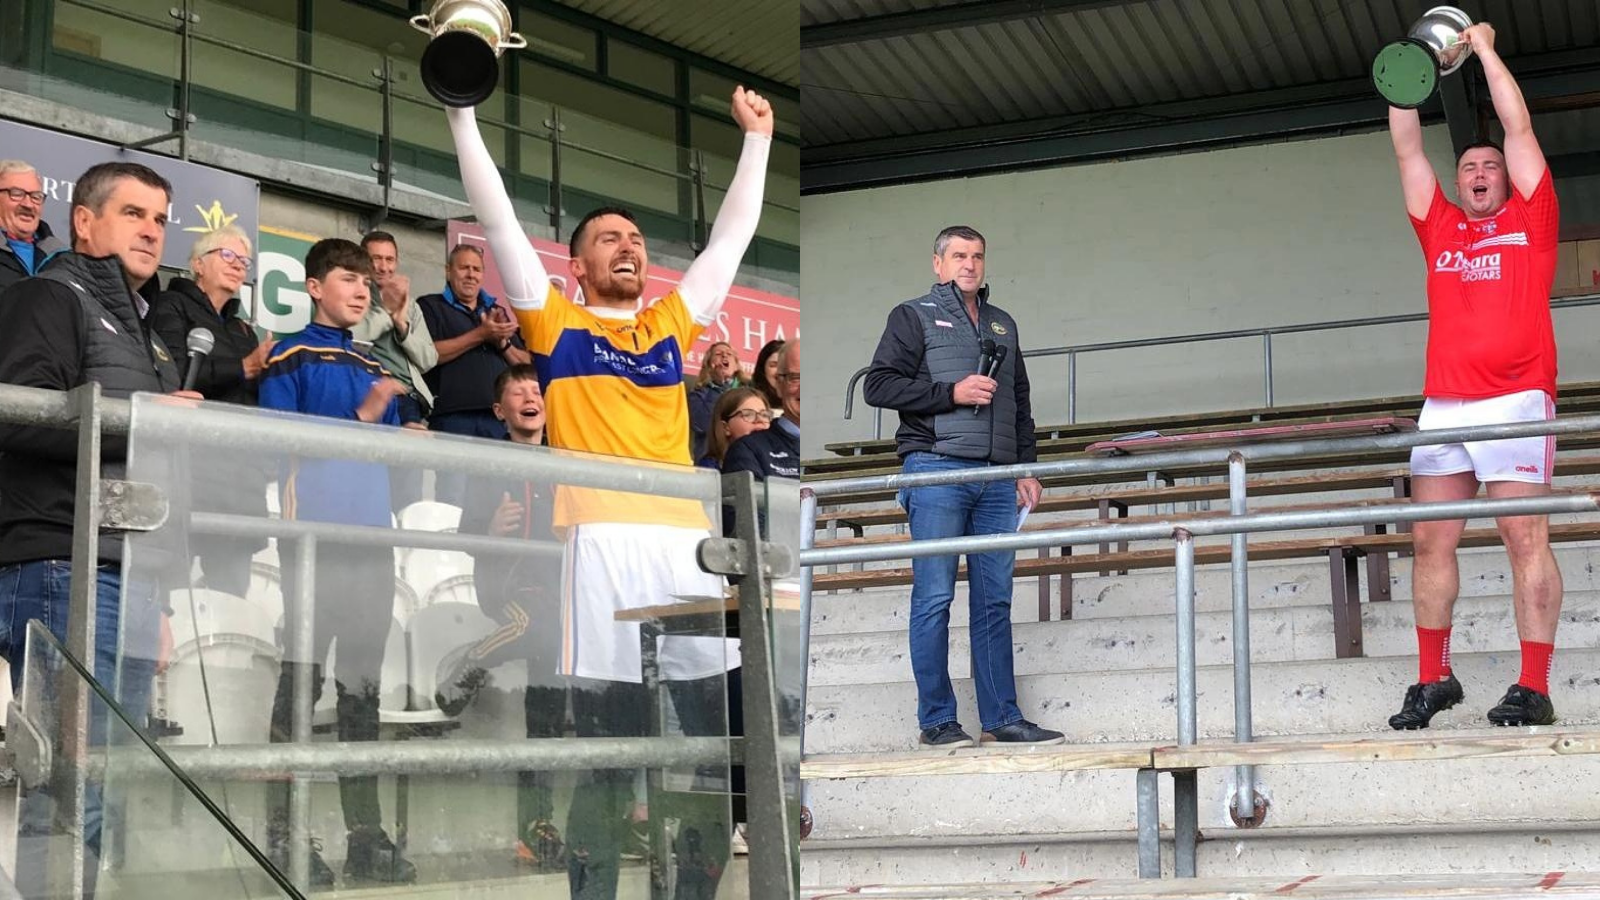 2020 Titles For St Rynagh’s & Shinrone